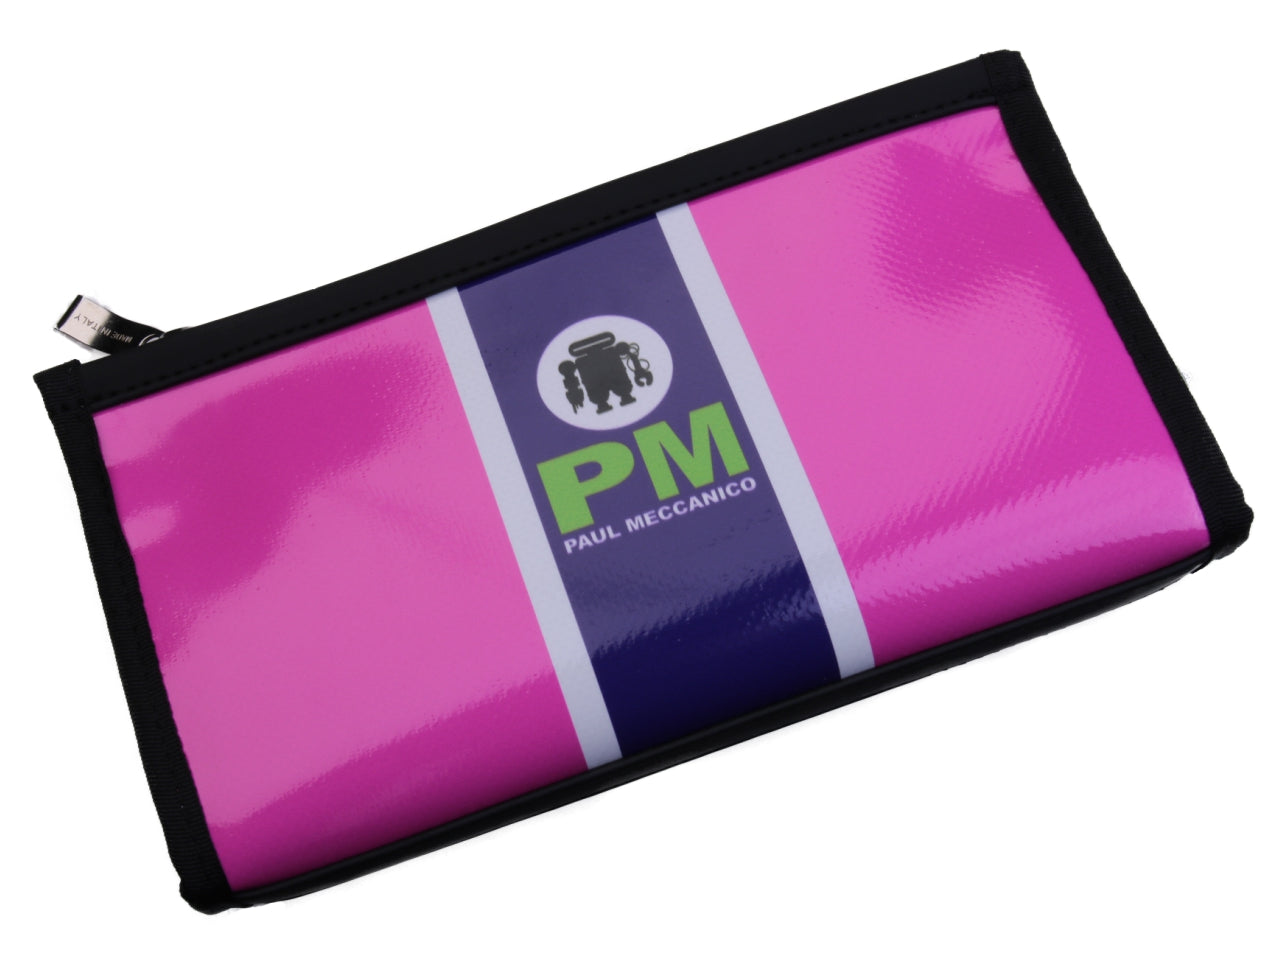 LARGE FUCHSIA WOMEN'S WALLET. MODEL PIT MADE OF LORRY TARPAULIN. - Limited Edition Paul Meccanico